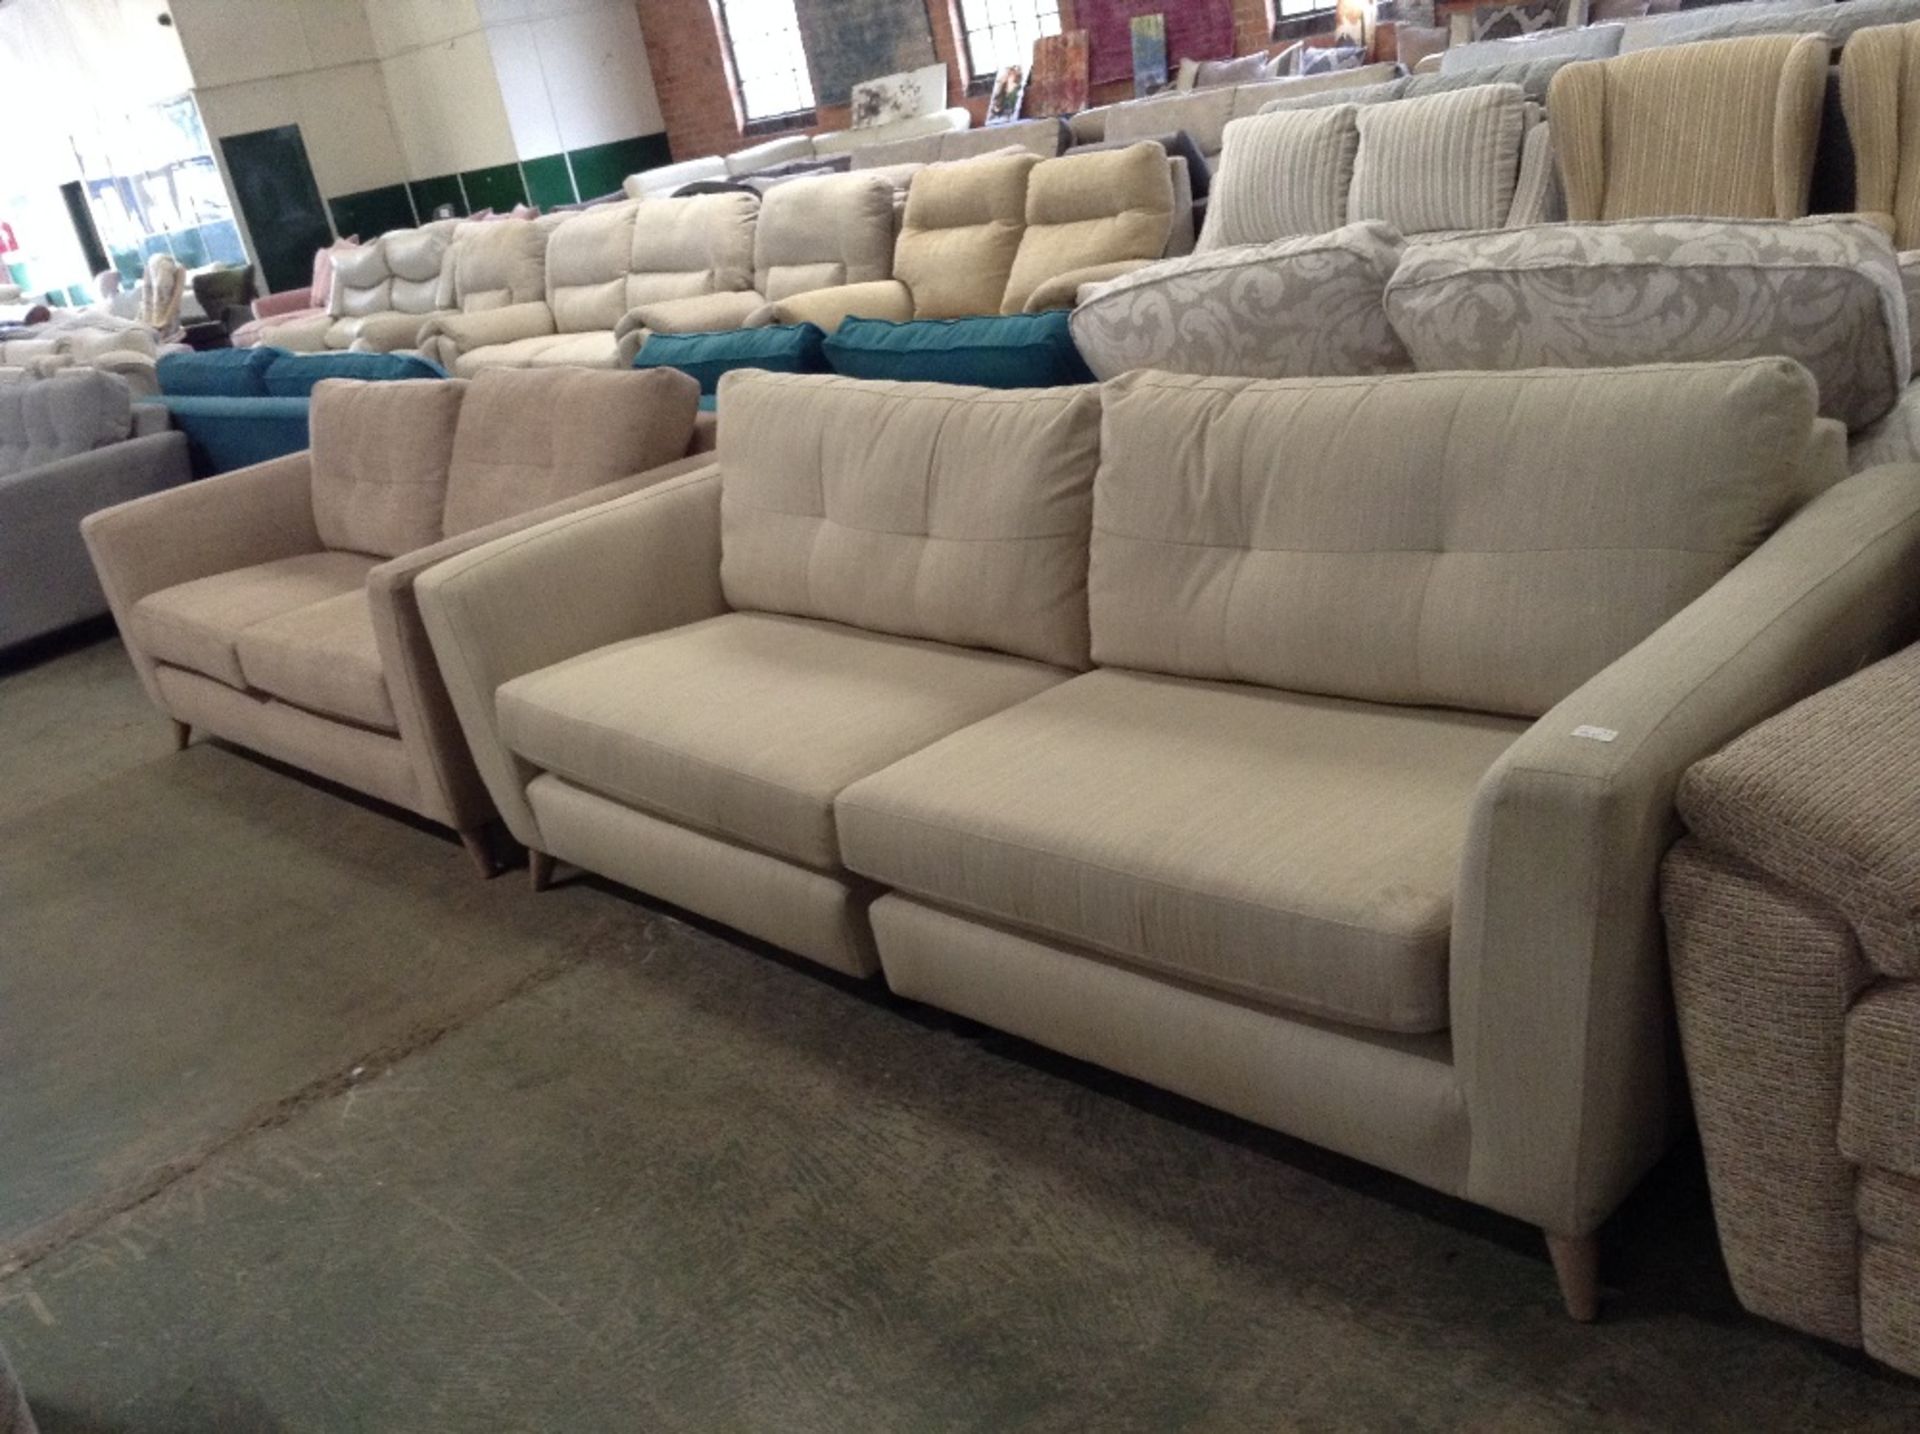 HOLLY BEIGE LARGE 4 SEATER SOFA AND HOLLU BISCUIT